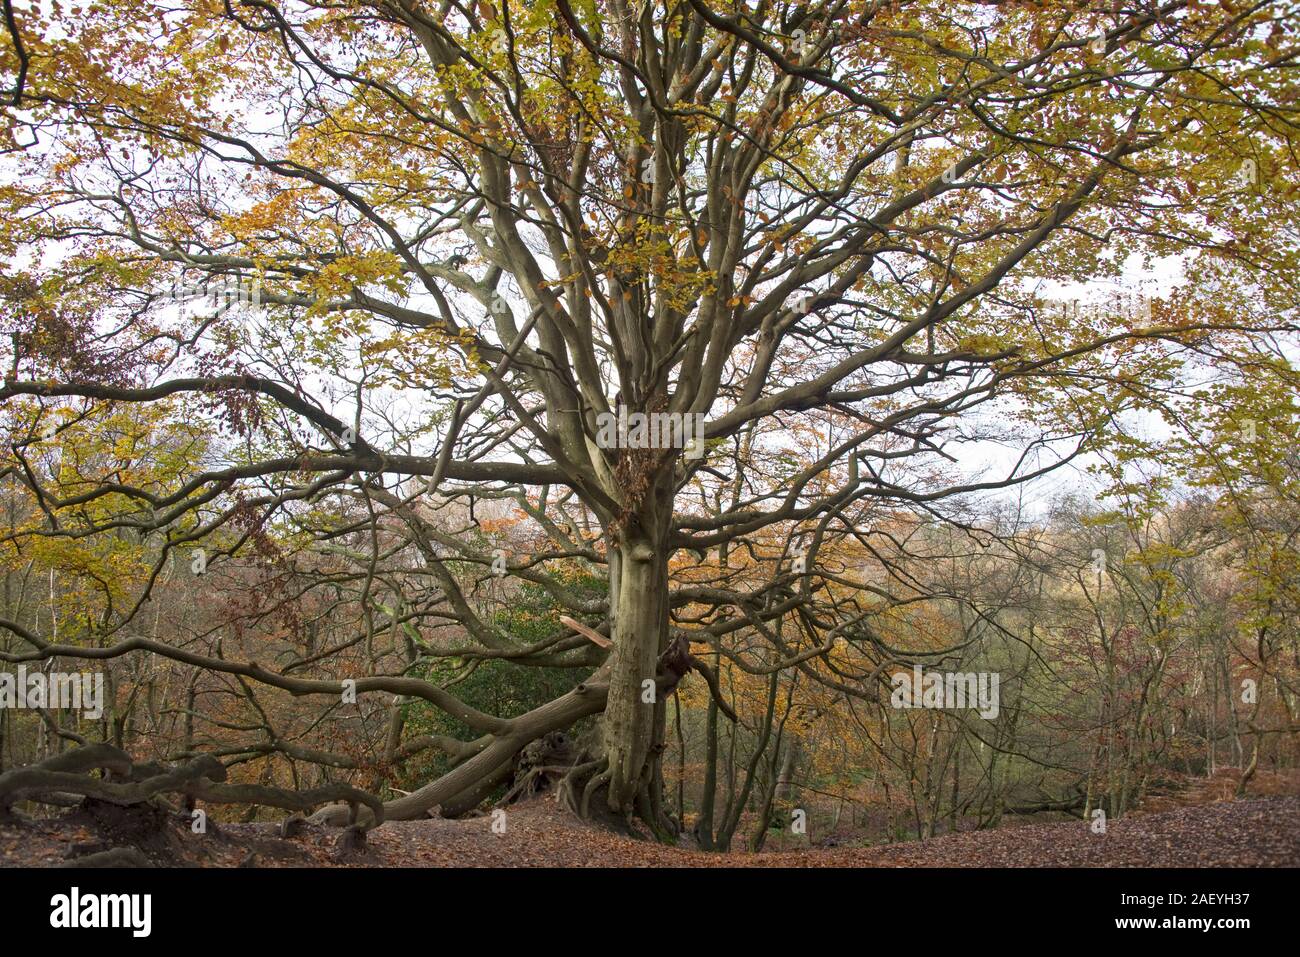 Large old beech tree (Fagus sylvatica) with autumnal colours and some large broken branches, among fallen leaves on heathand, Berkshire, November Stock Photo